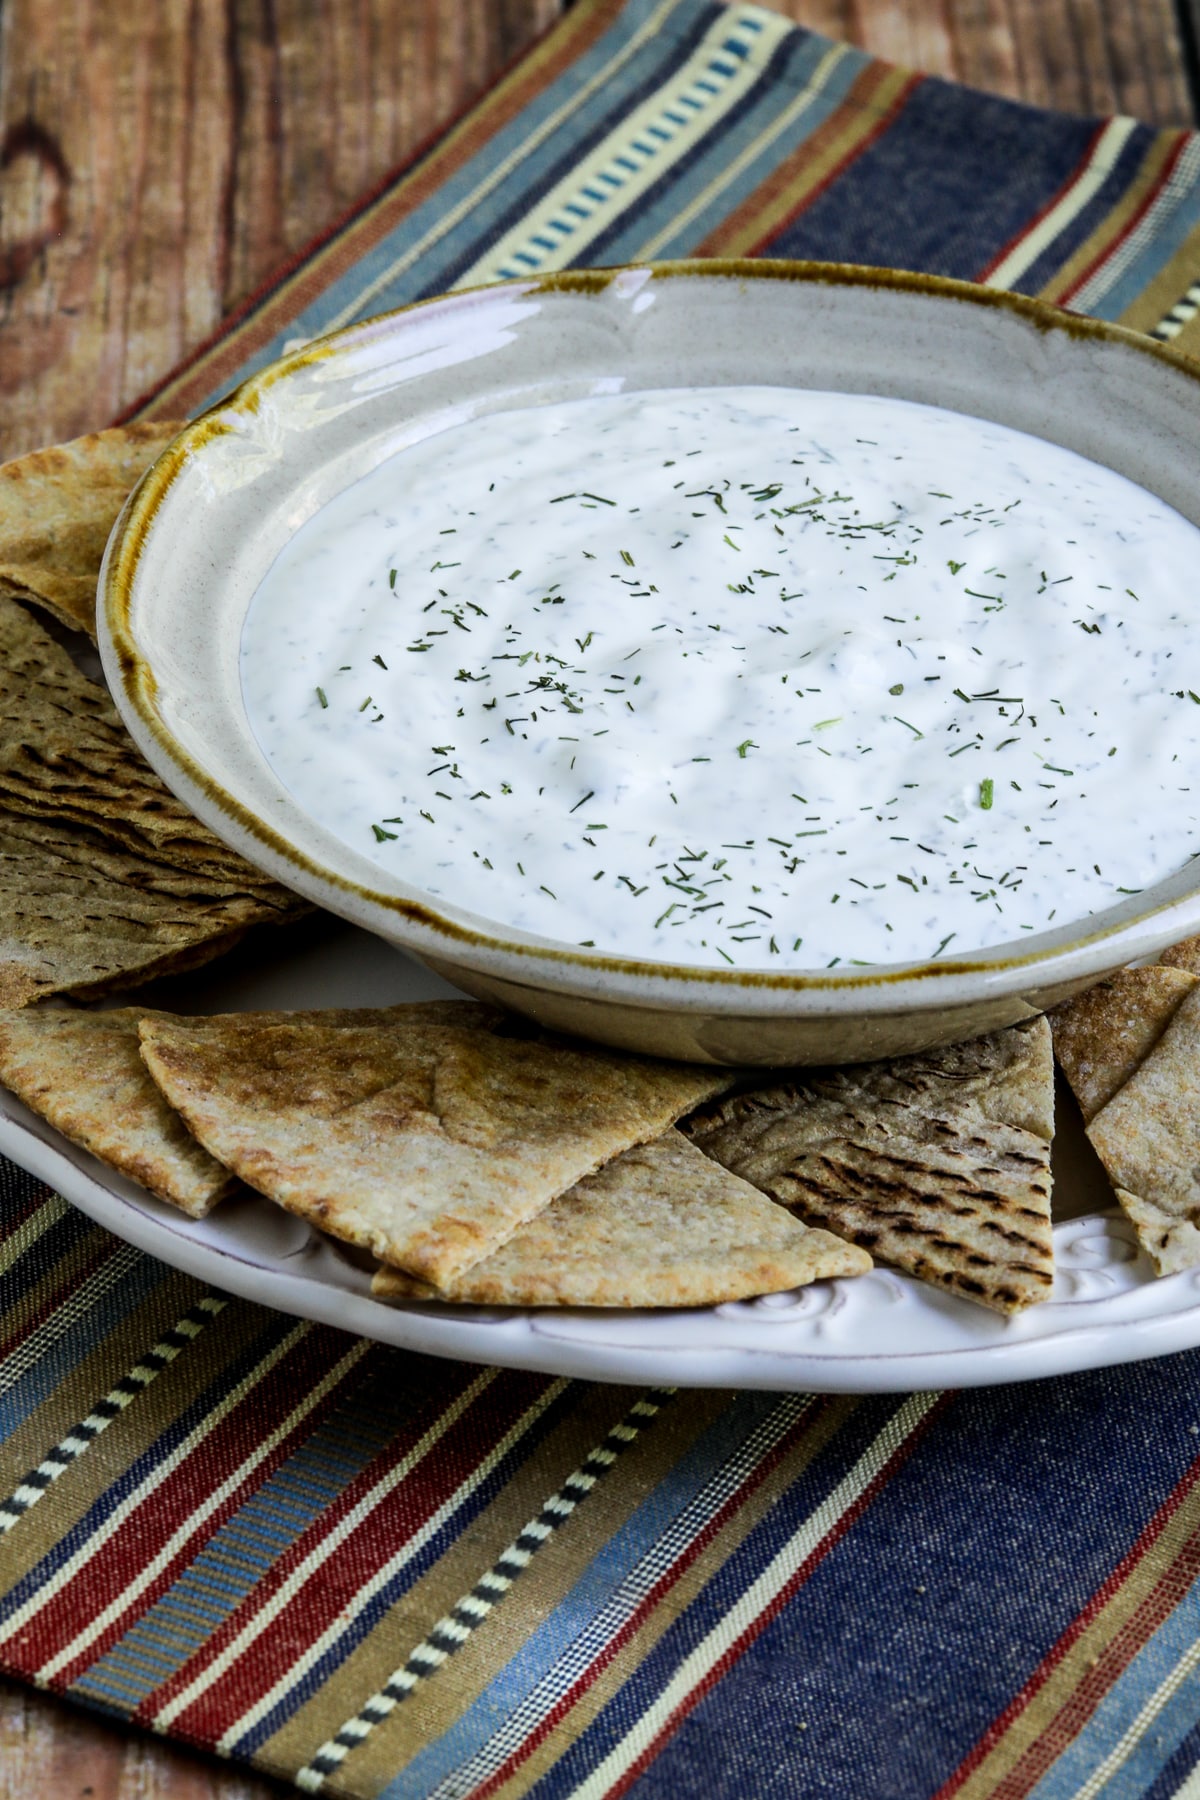 How to Make Tzatziki Sauce with Tzatziki shown in bowl on plate with pita bread.